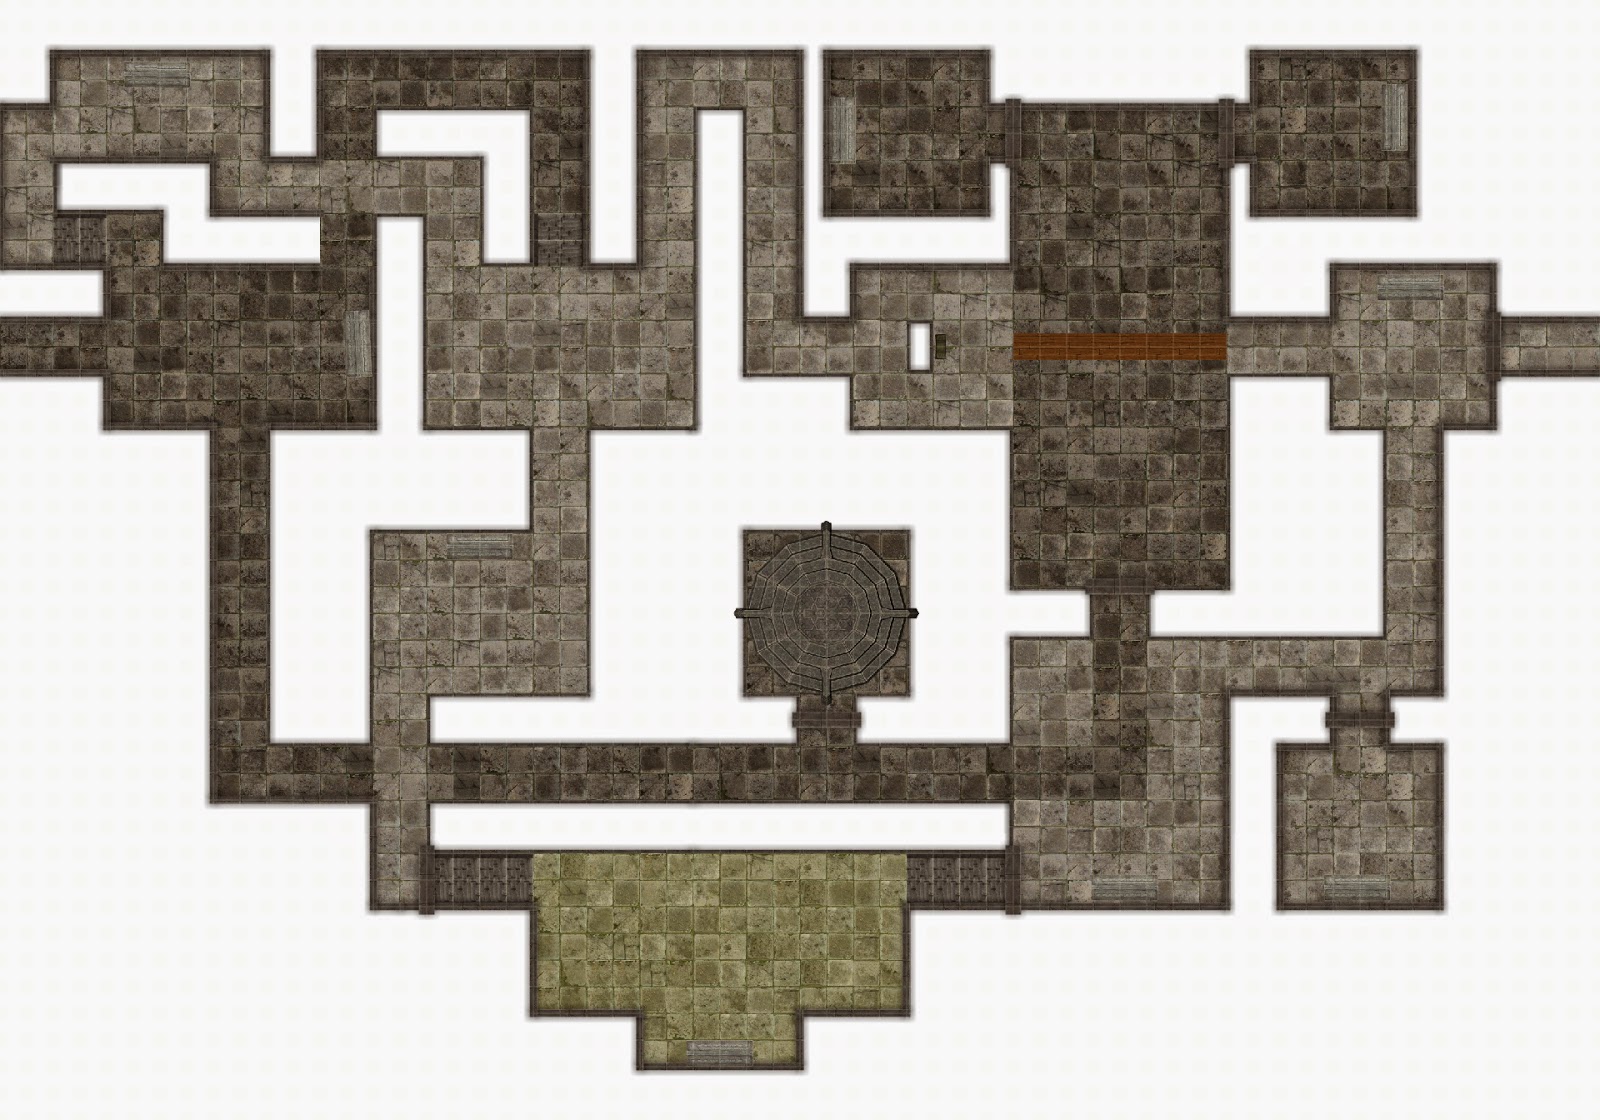 Gallery of Dnd Maze Map.